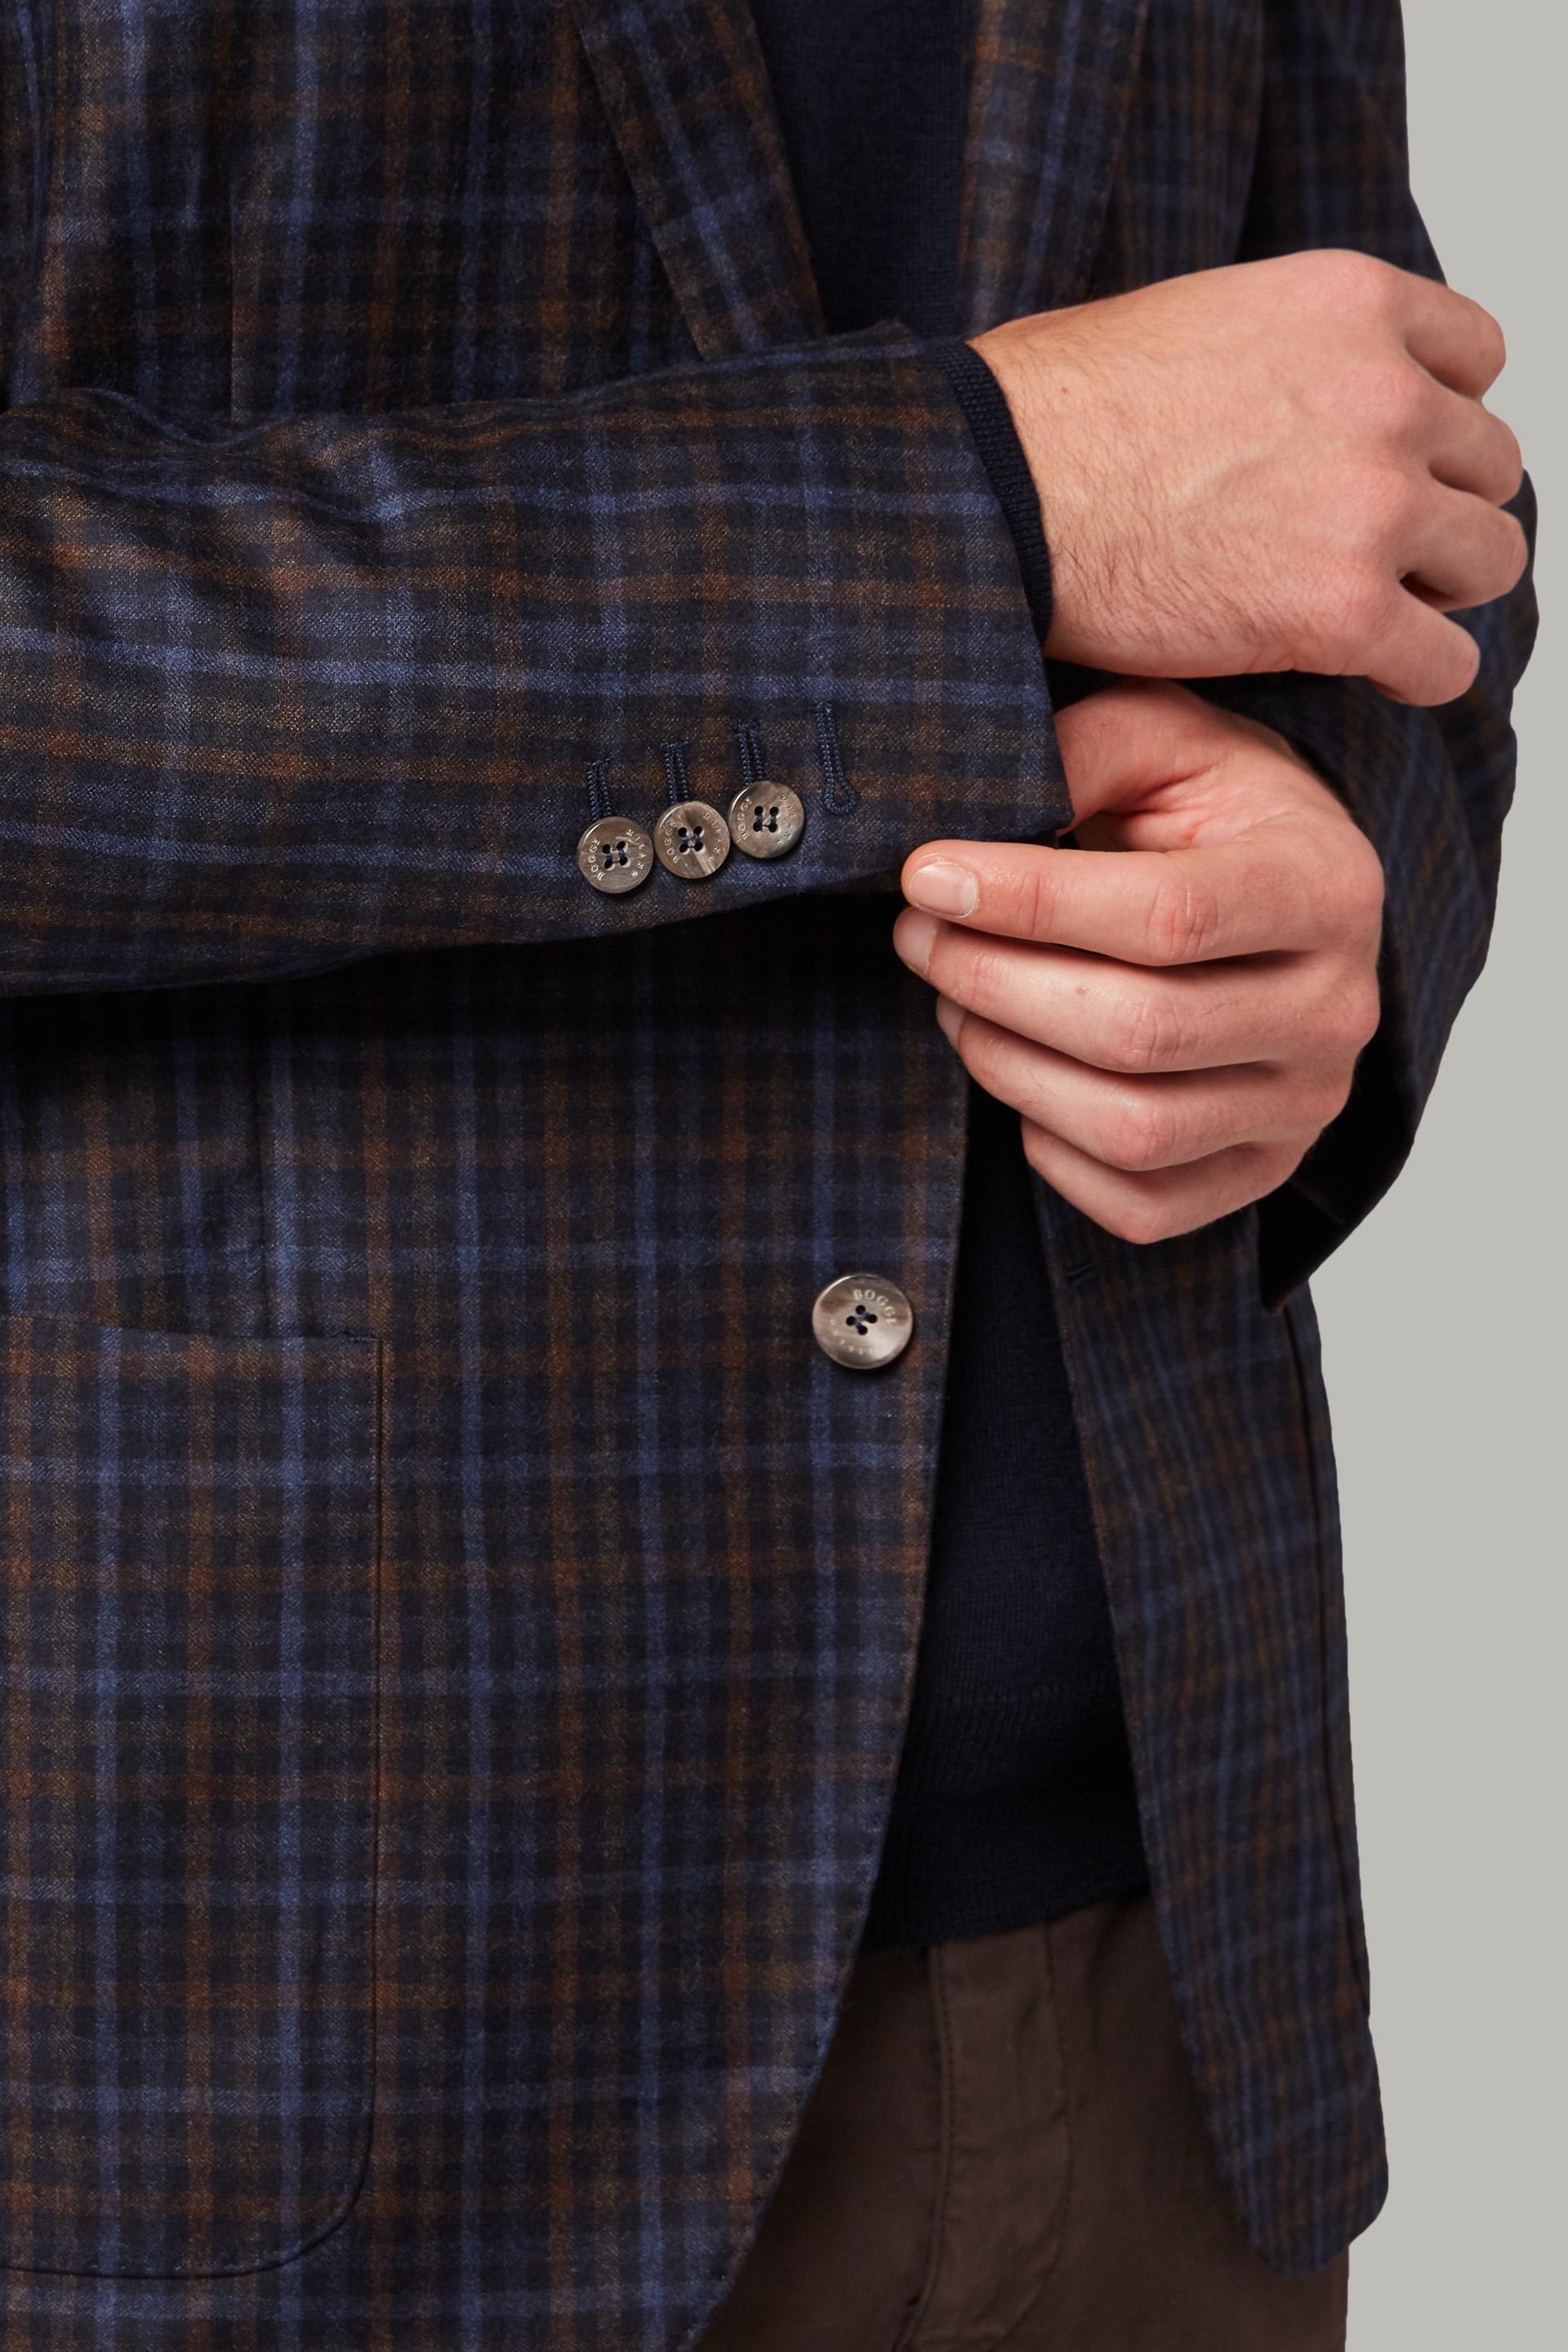 Boggi Milano - Brown And Blue Gingham Flannel Jacket